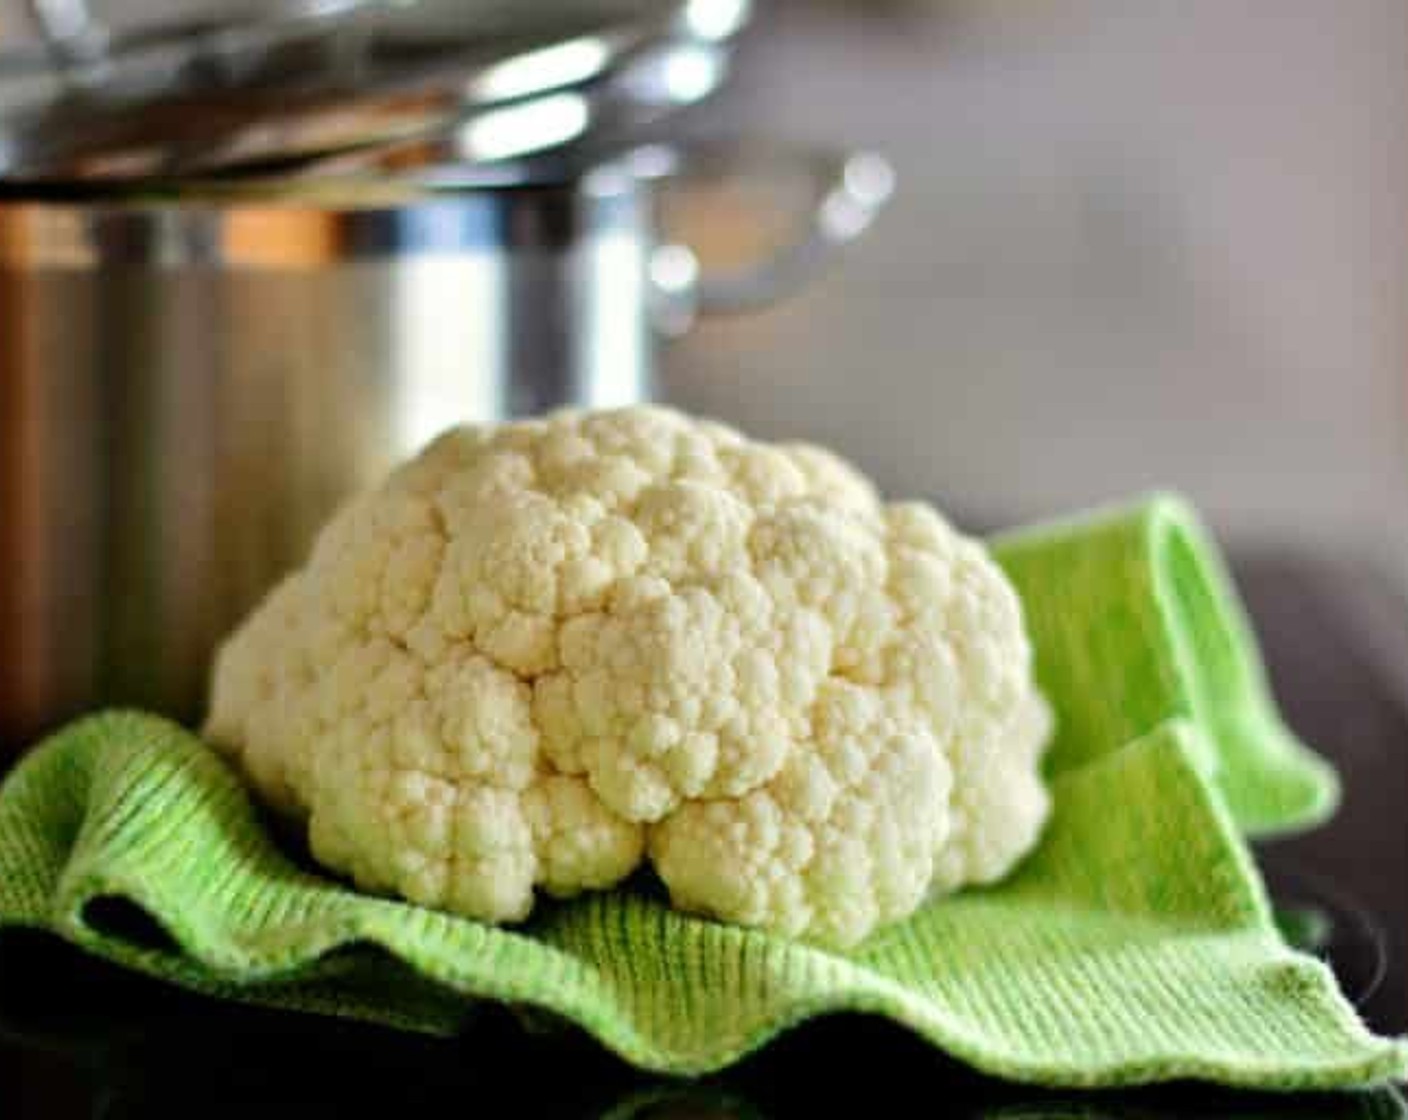 step 2 Using the “steam” setting, cook the Cauliflower (1 head) in an Instant Pot for 3 minutes, and do a quick release. Save the liquid.